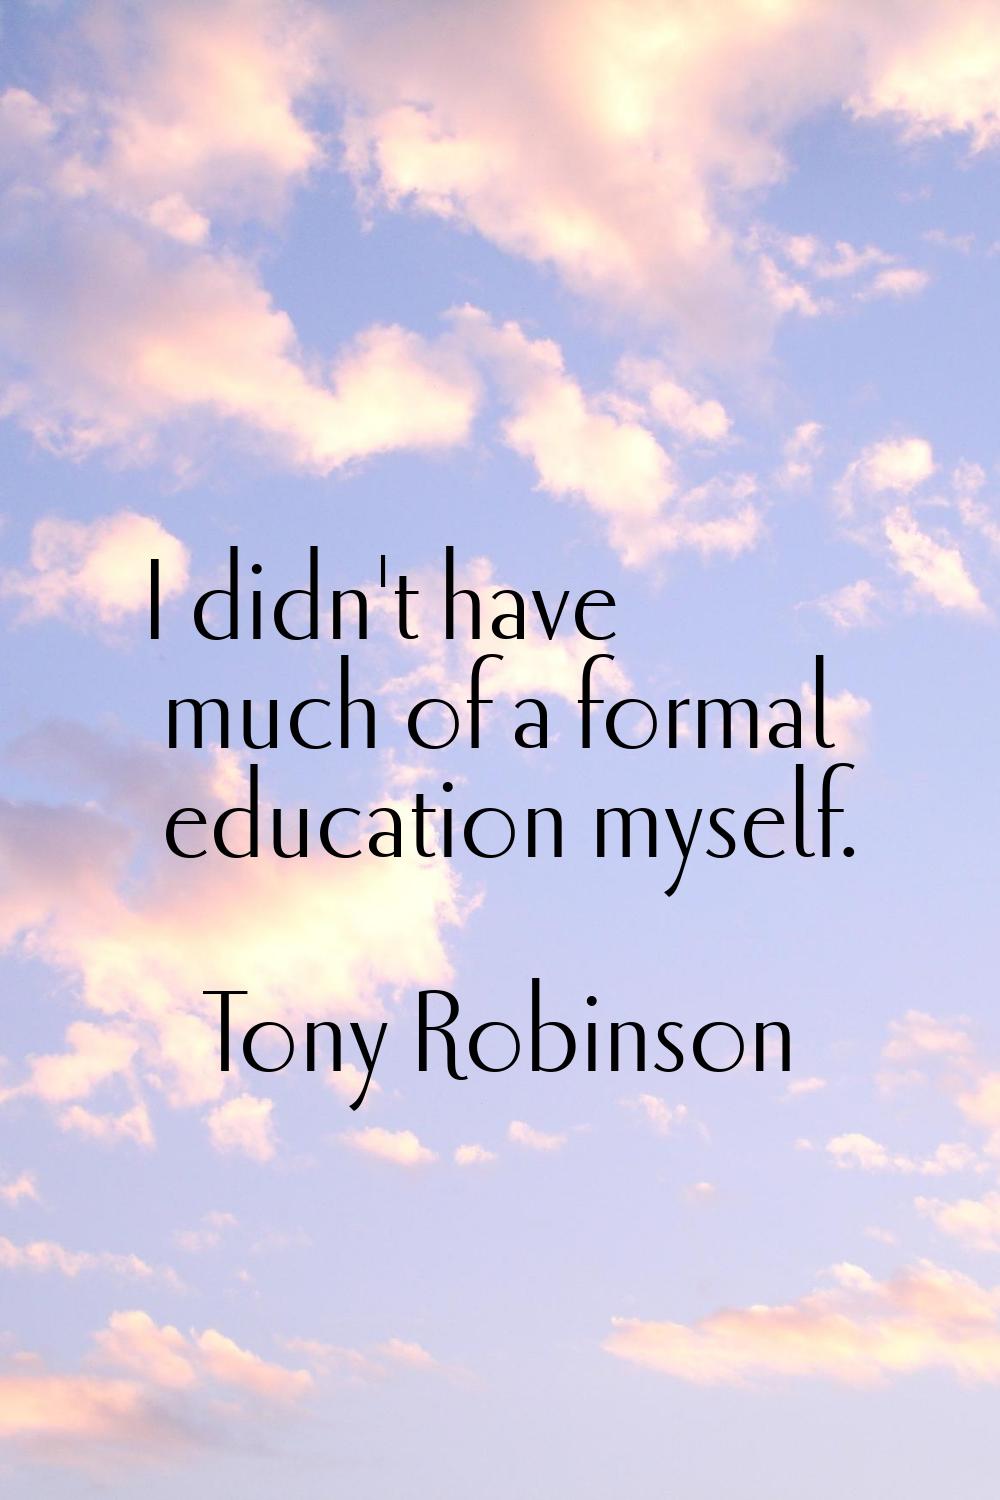 I didn't have much of a formal education myself.